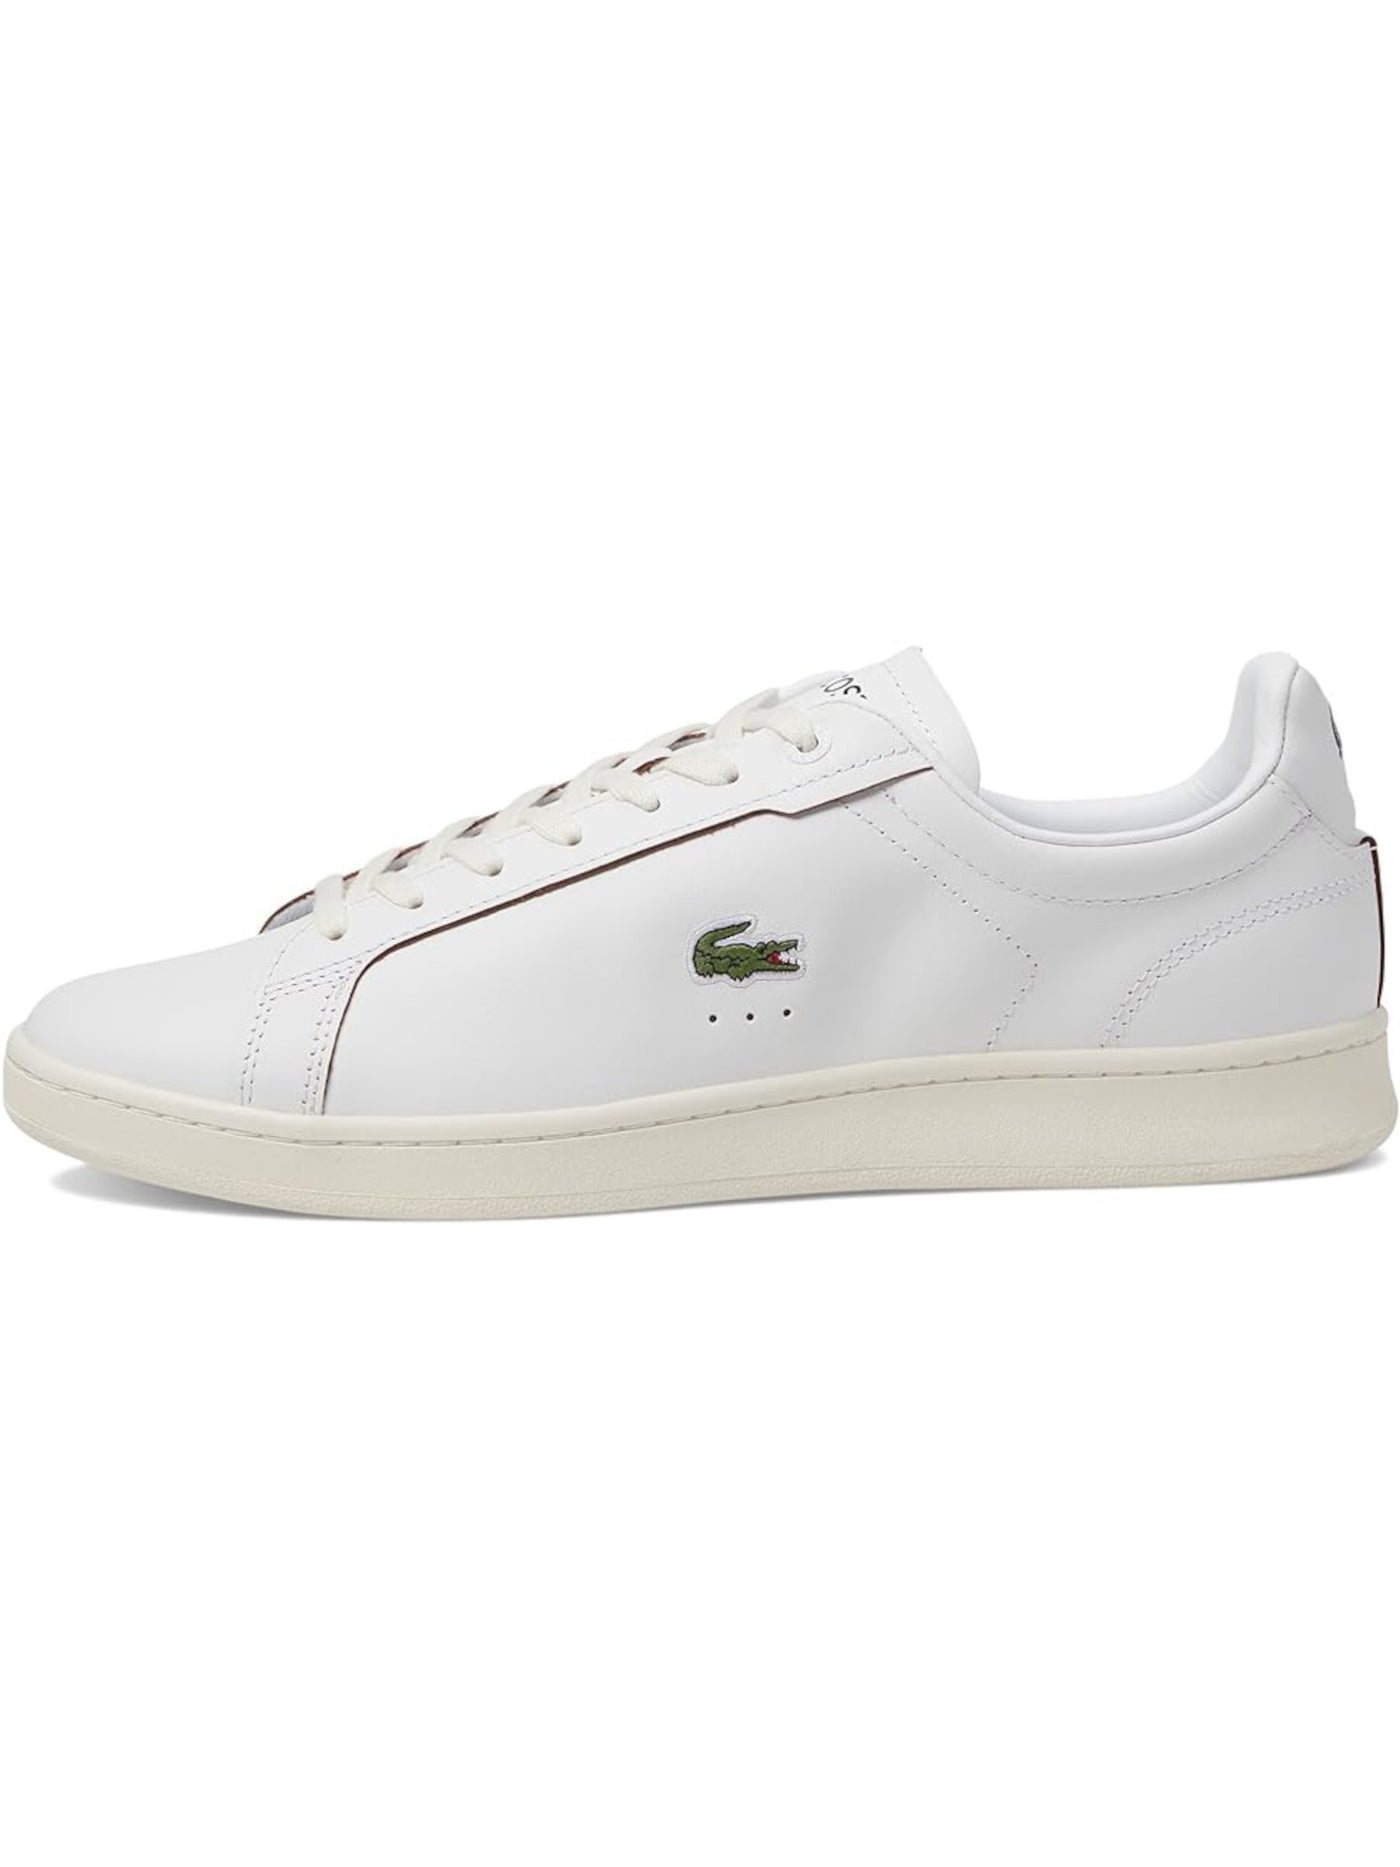 LACOSTE Mens White Cushioned Carnaby Round Toe Lace-Up Leather Athletic Sneakers Shoes M